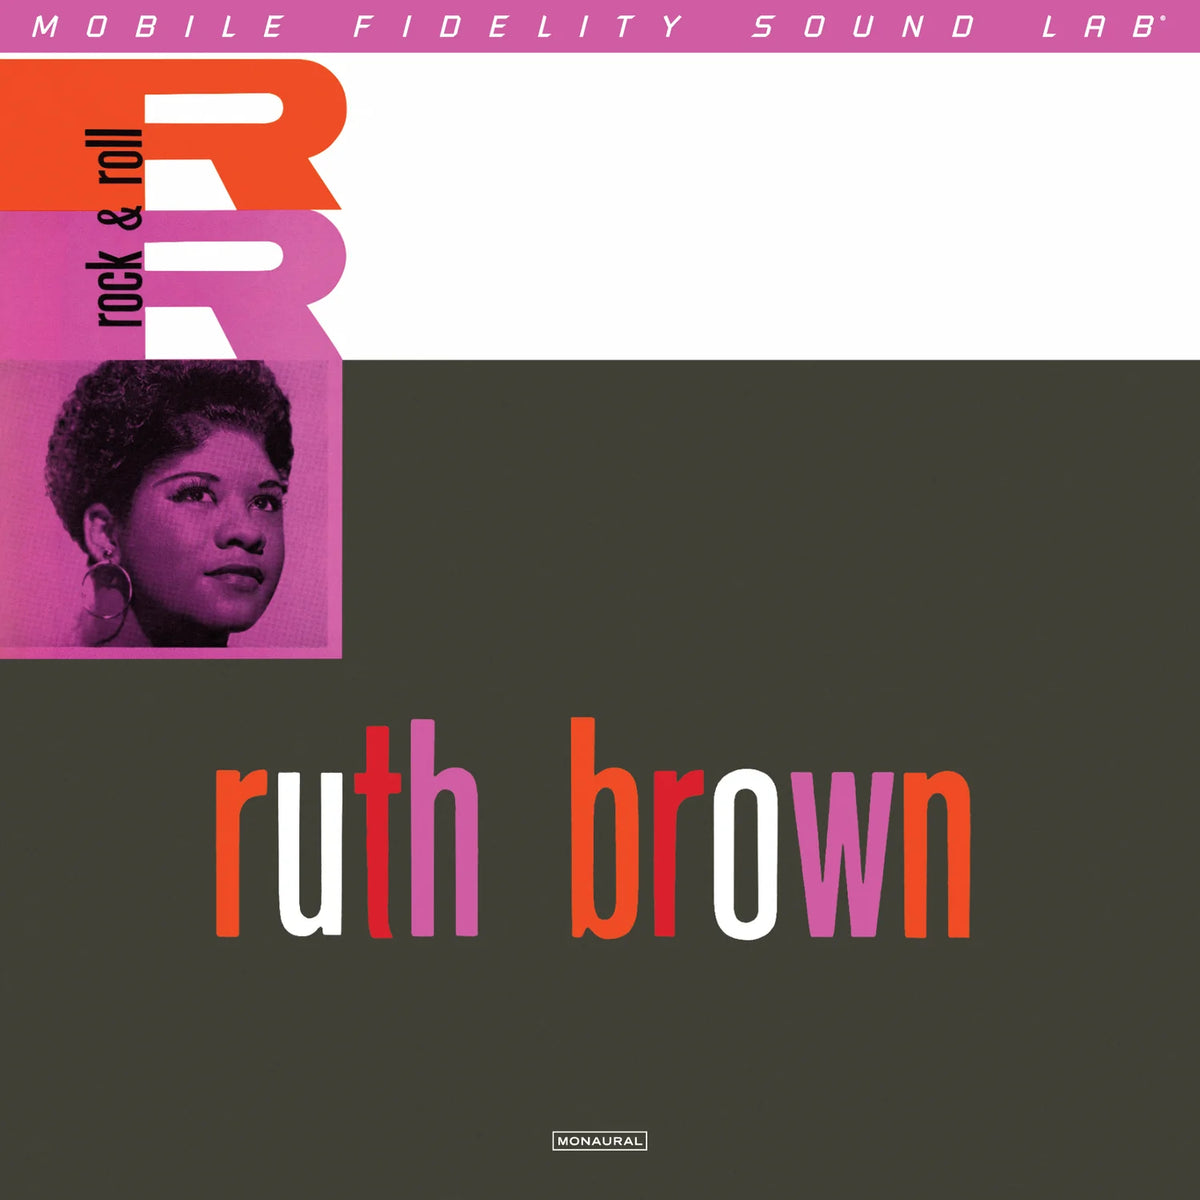 
  
  Ruth Brown – Rock and Roll LP Vinyl
  
